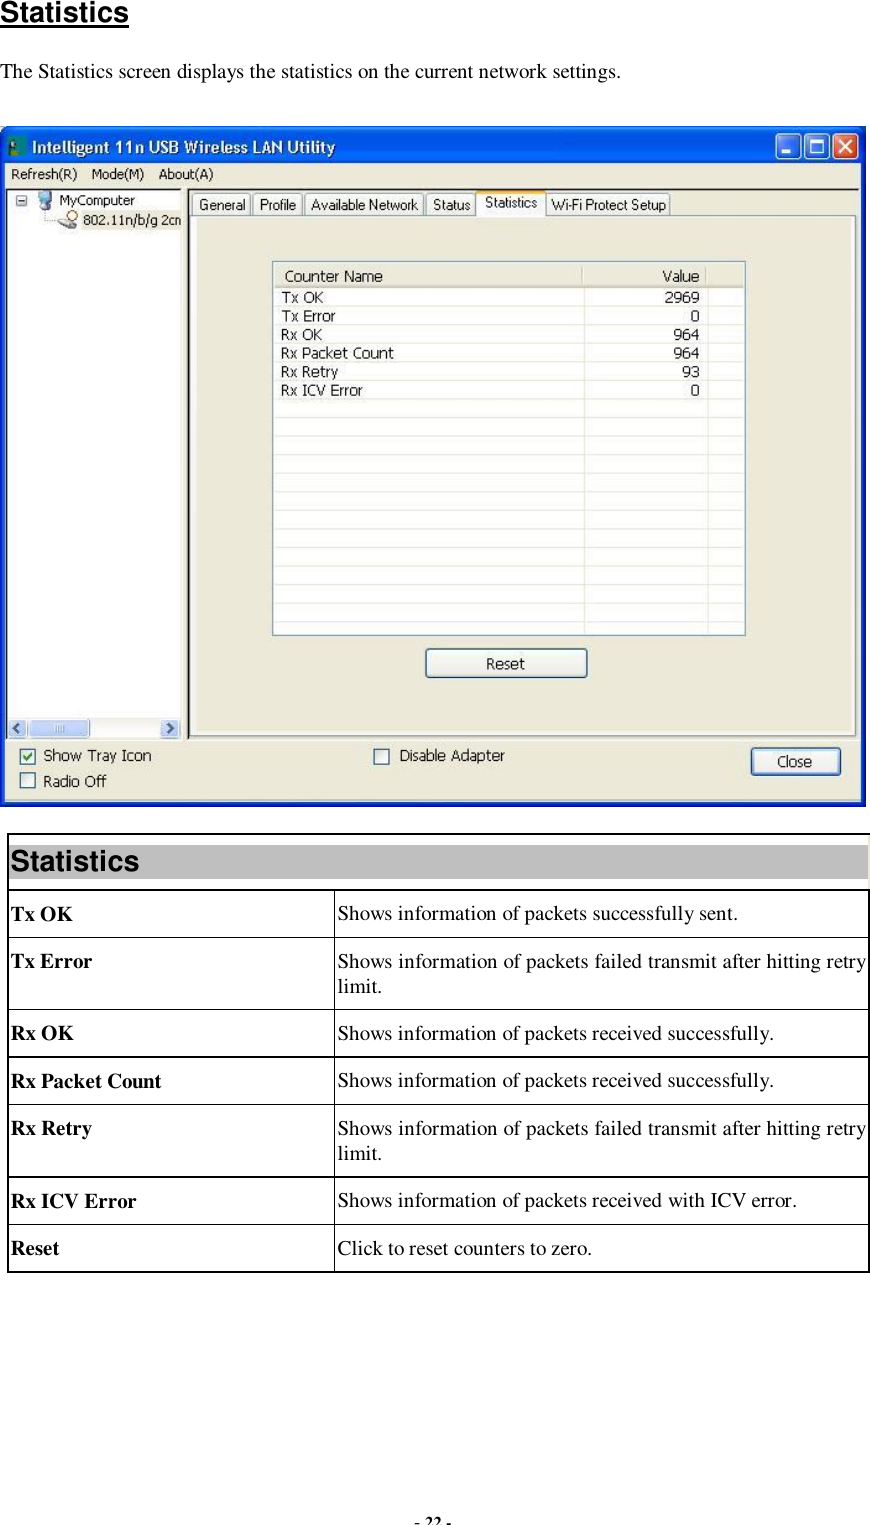  - 22 -  Statistics The Statistics screen displays the statistics on the current network settings.  Statistics Tx OK  Shows information of packets successfully sent. Tx Error  Shows information of packets failed transmit after hitting retry limit. Rx OK  Shows information of packets received successfully. Rx Packet Count  Shows information of packets received successfully. Rx Retry  Shows information of packets failed transmit after hitting retry limit. Rx ICV Error  Shows information of packets received with ICV error. Reset  Click to reset counters to zero.   